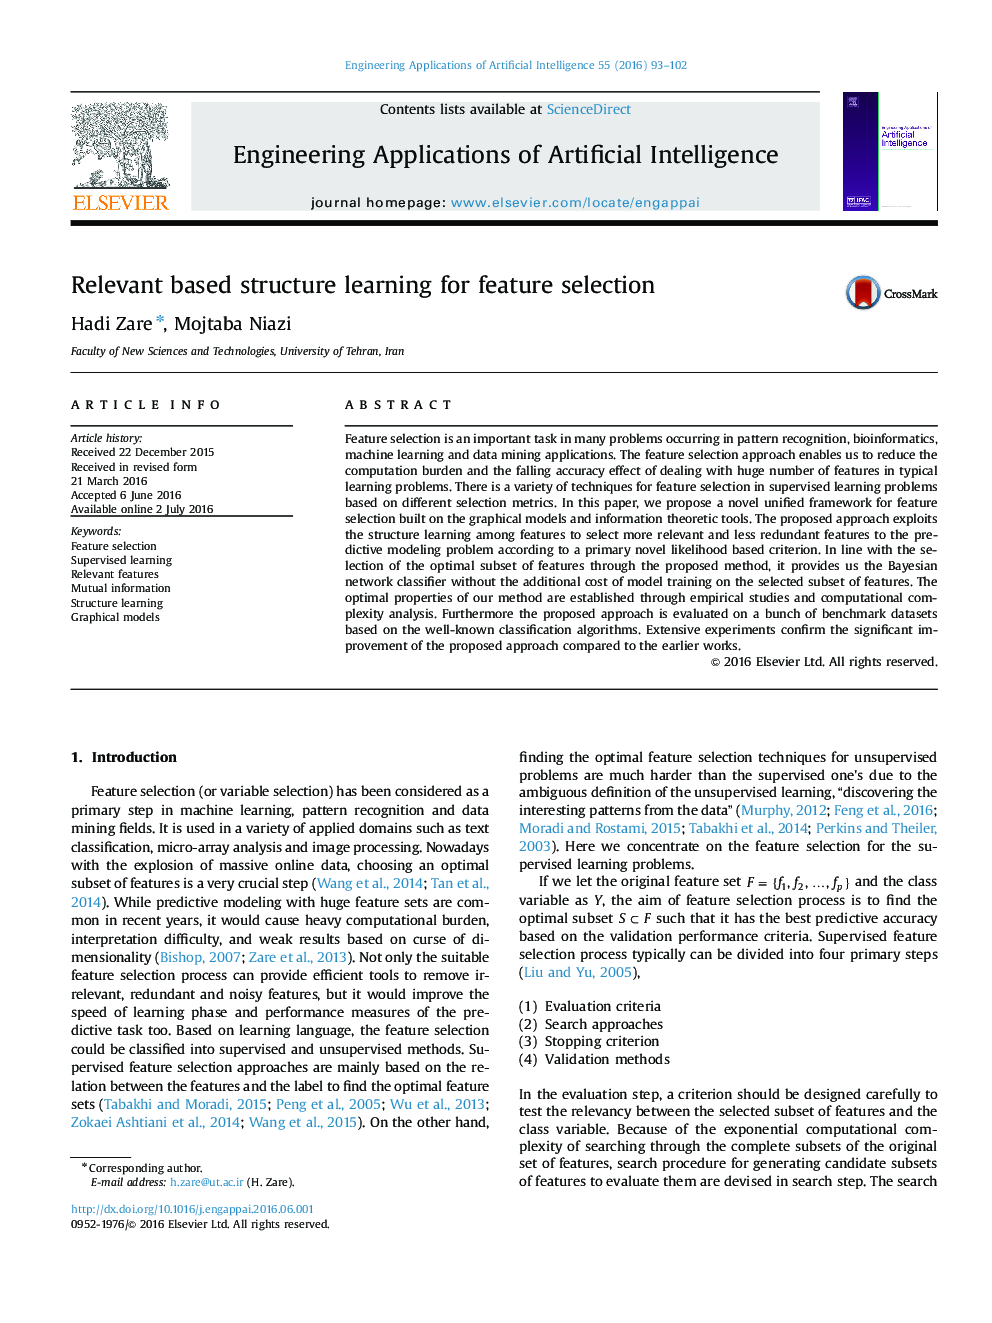 Relevant based structure learning for feature selection